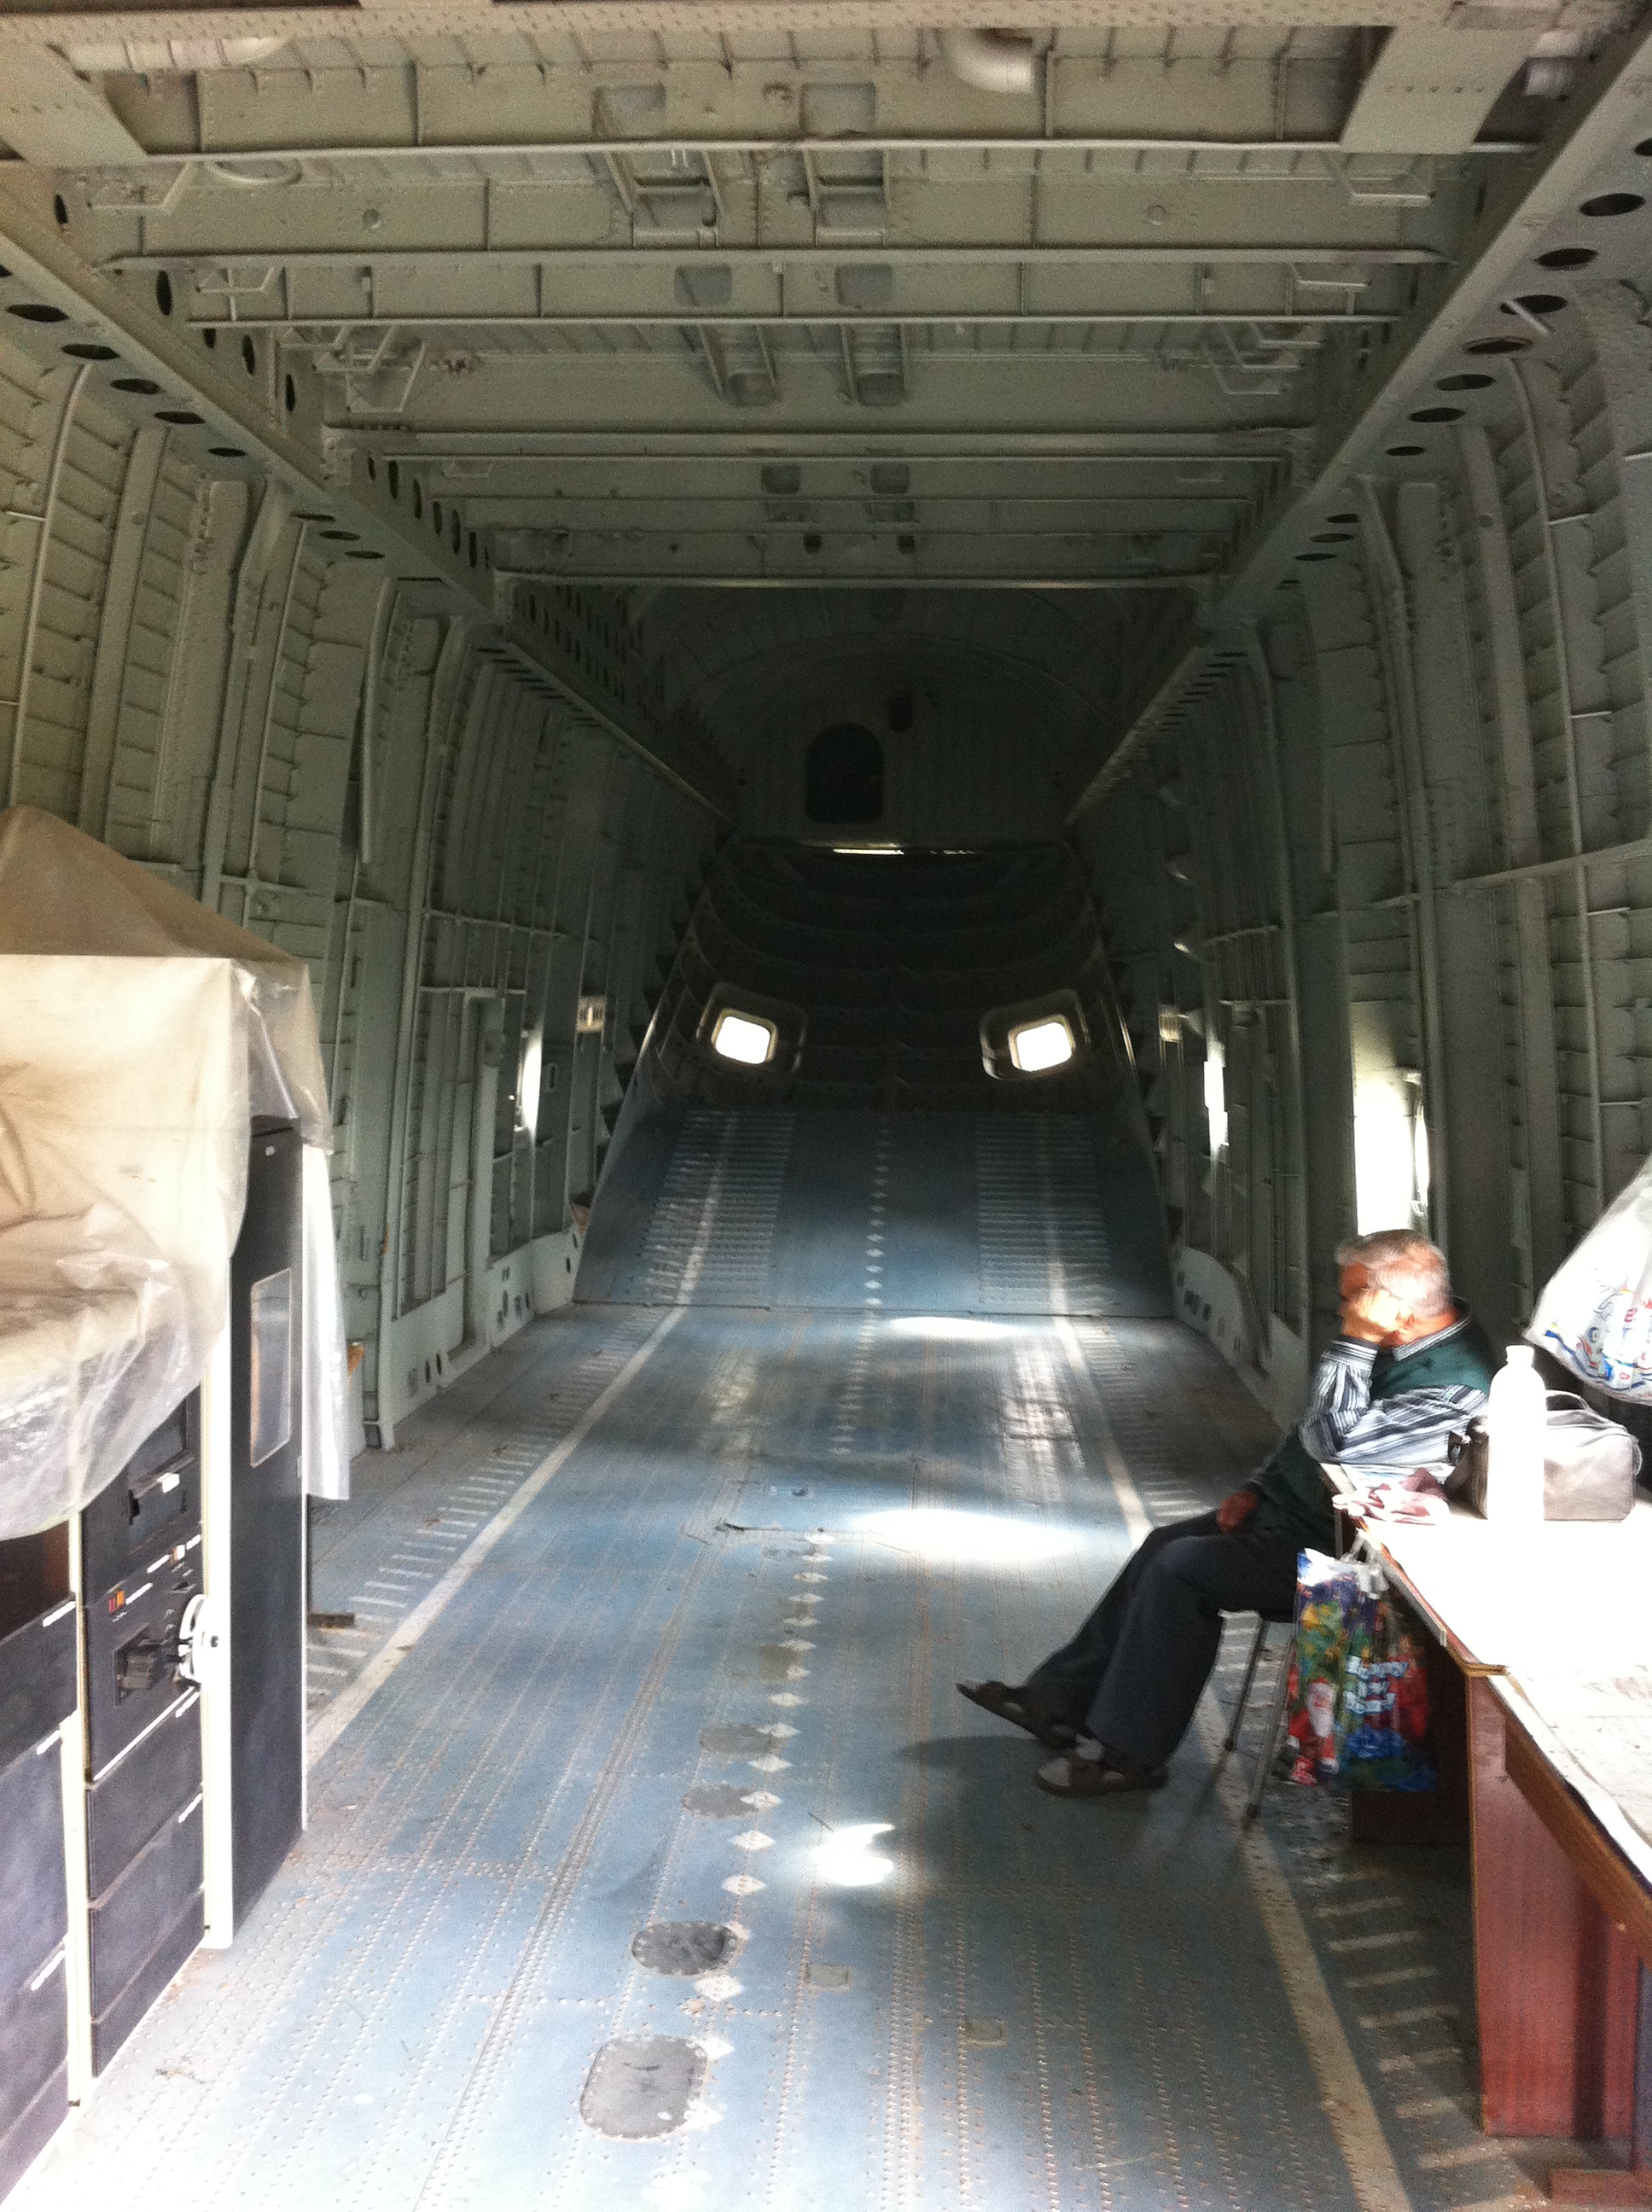 Mil_Mi-26_Russian_helicopter_cargo_compartment.jpg